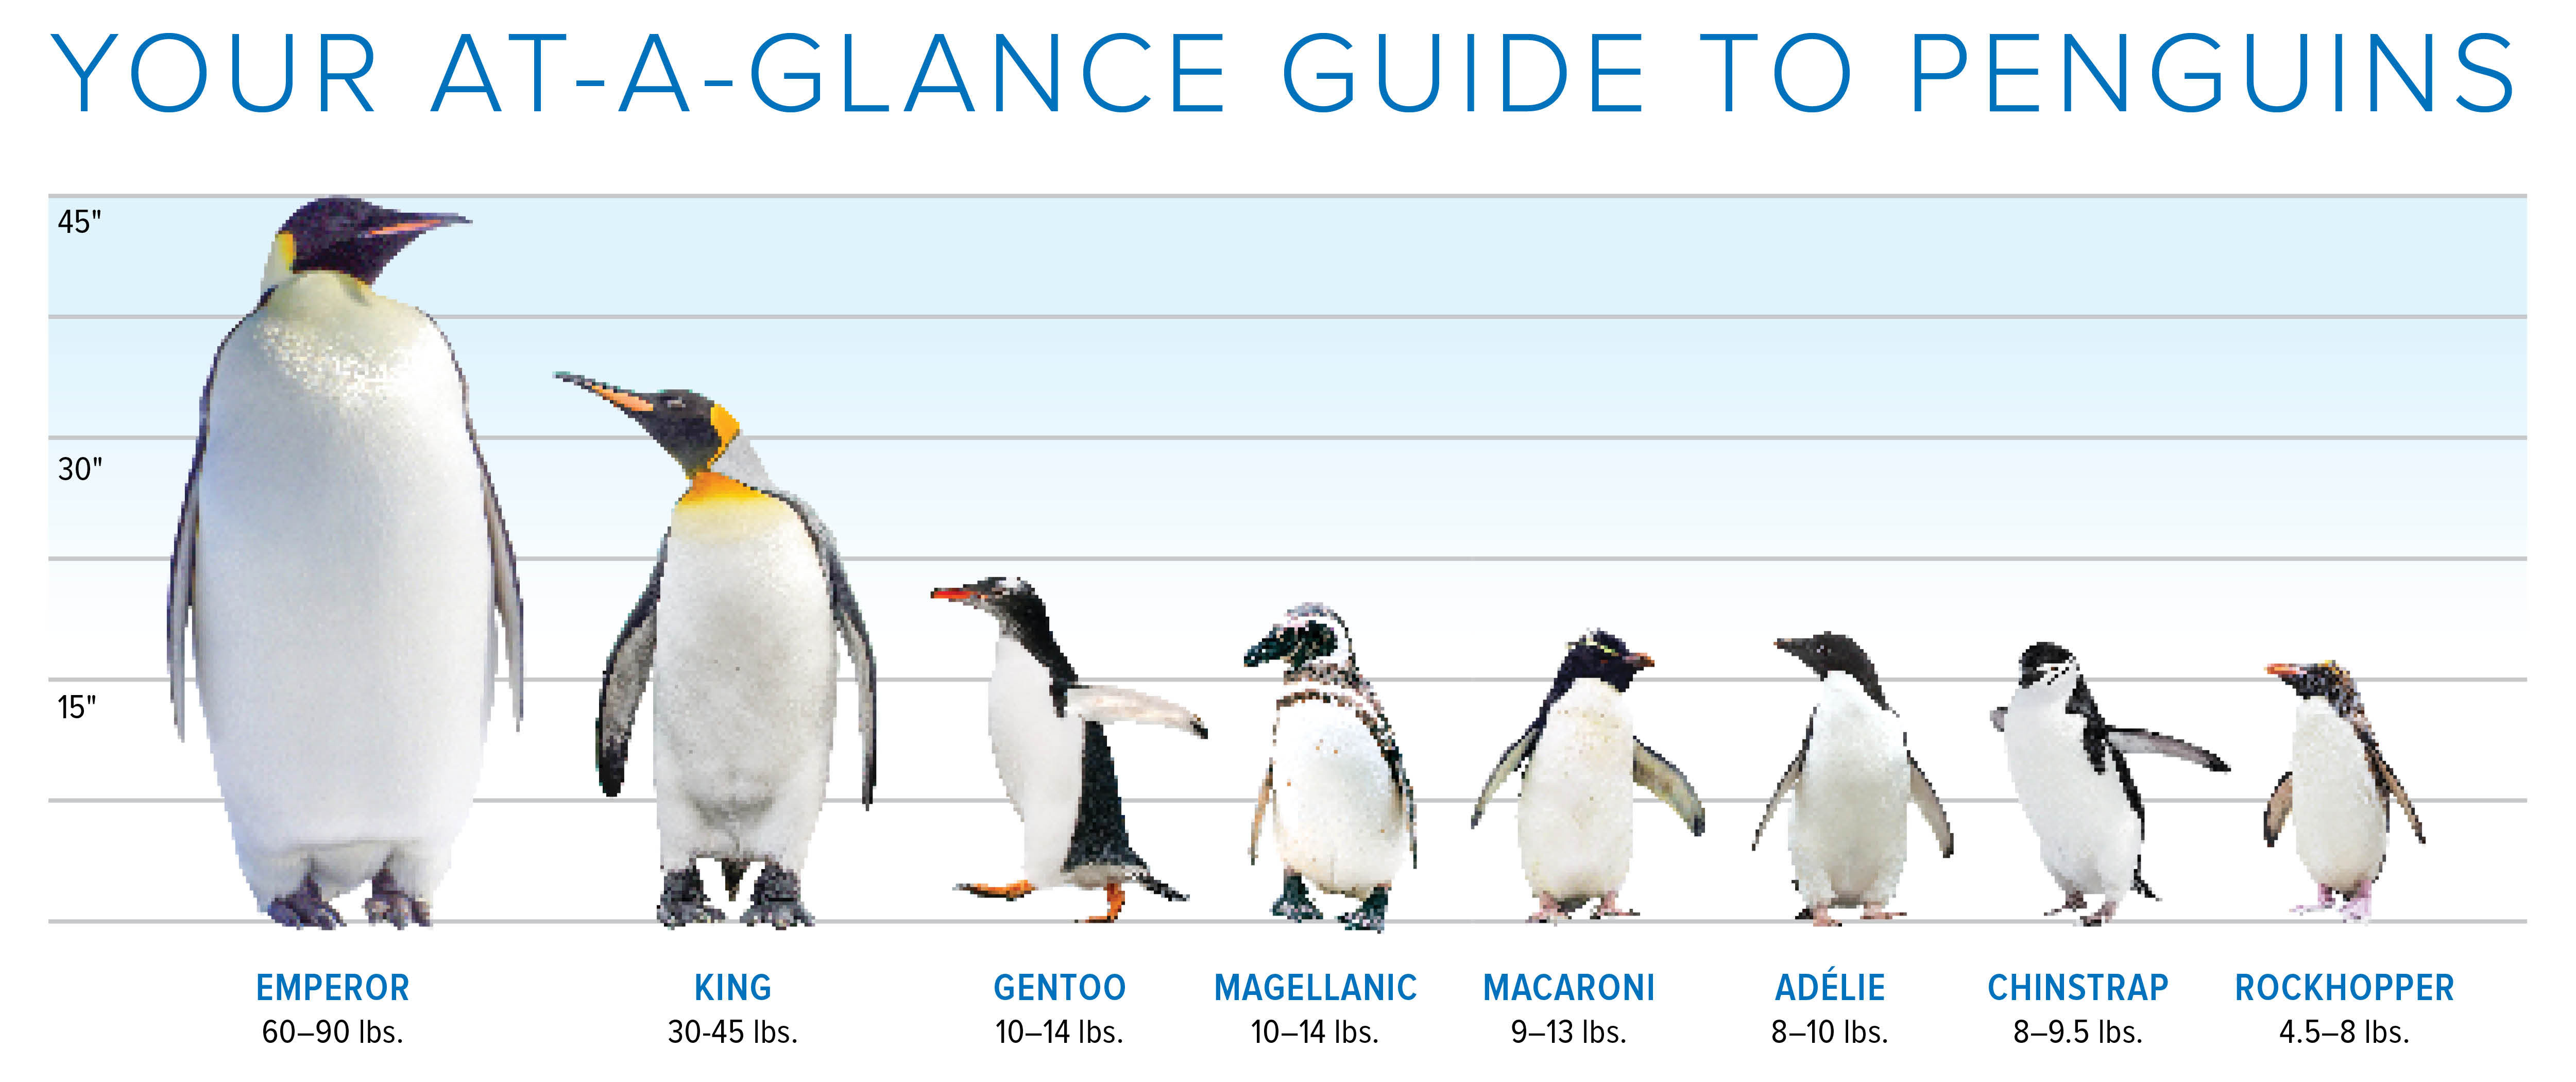 Meet the Elite 8 Penguins of the Southern Ocean